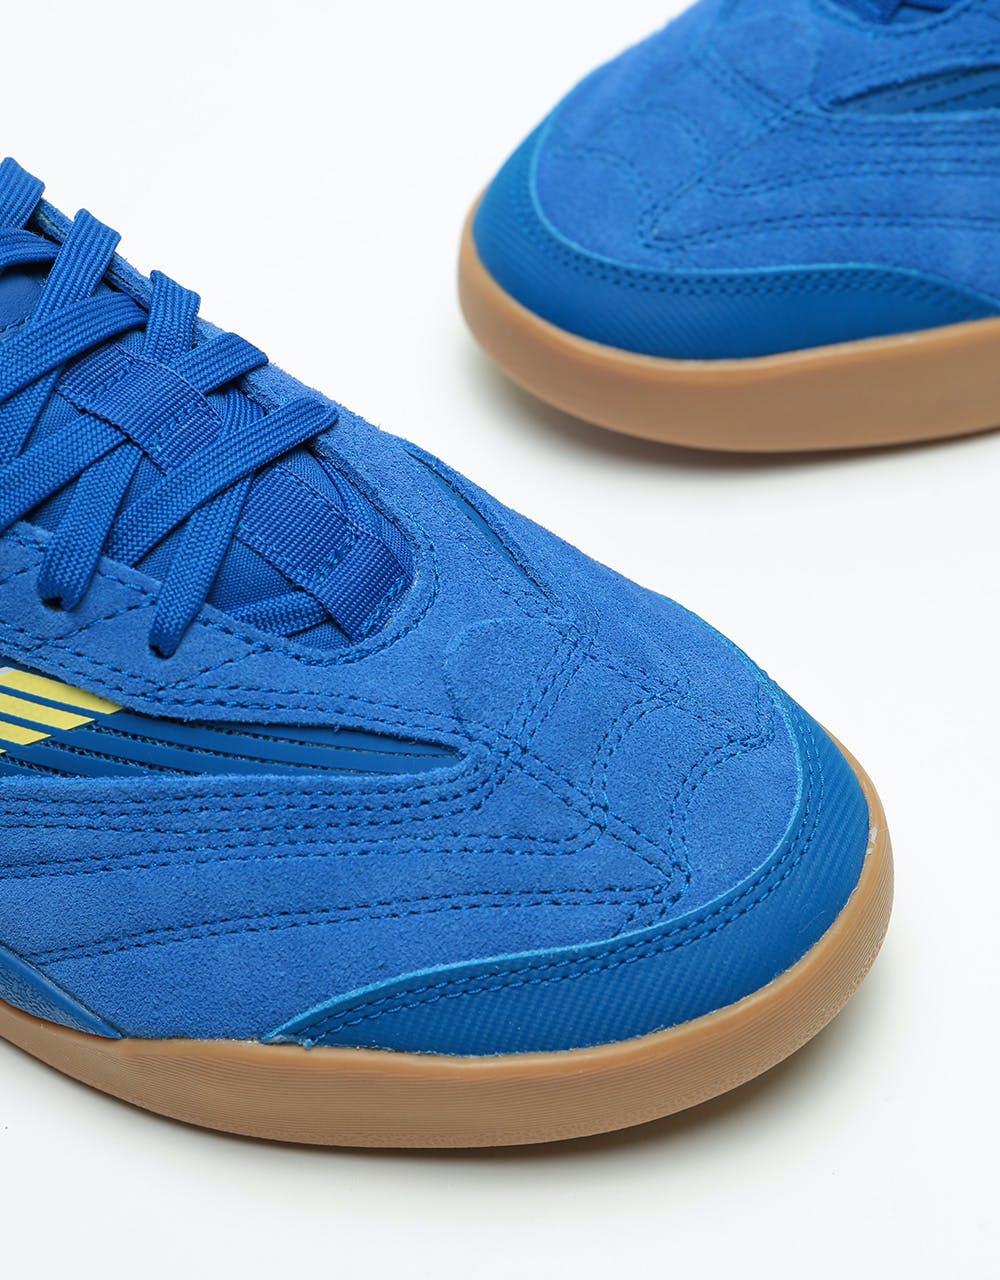 Adidas Copa Nationale Skate Shoes - Team Royal Blue/Yellow Tint/White